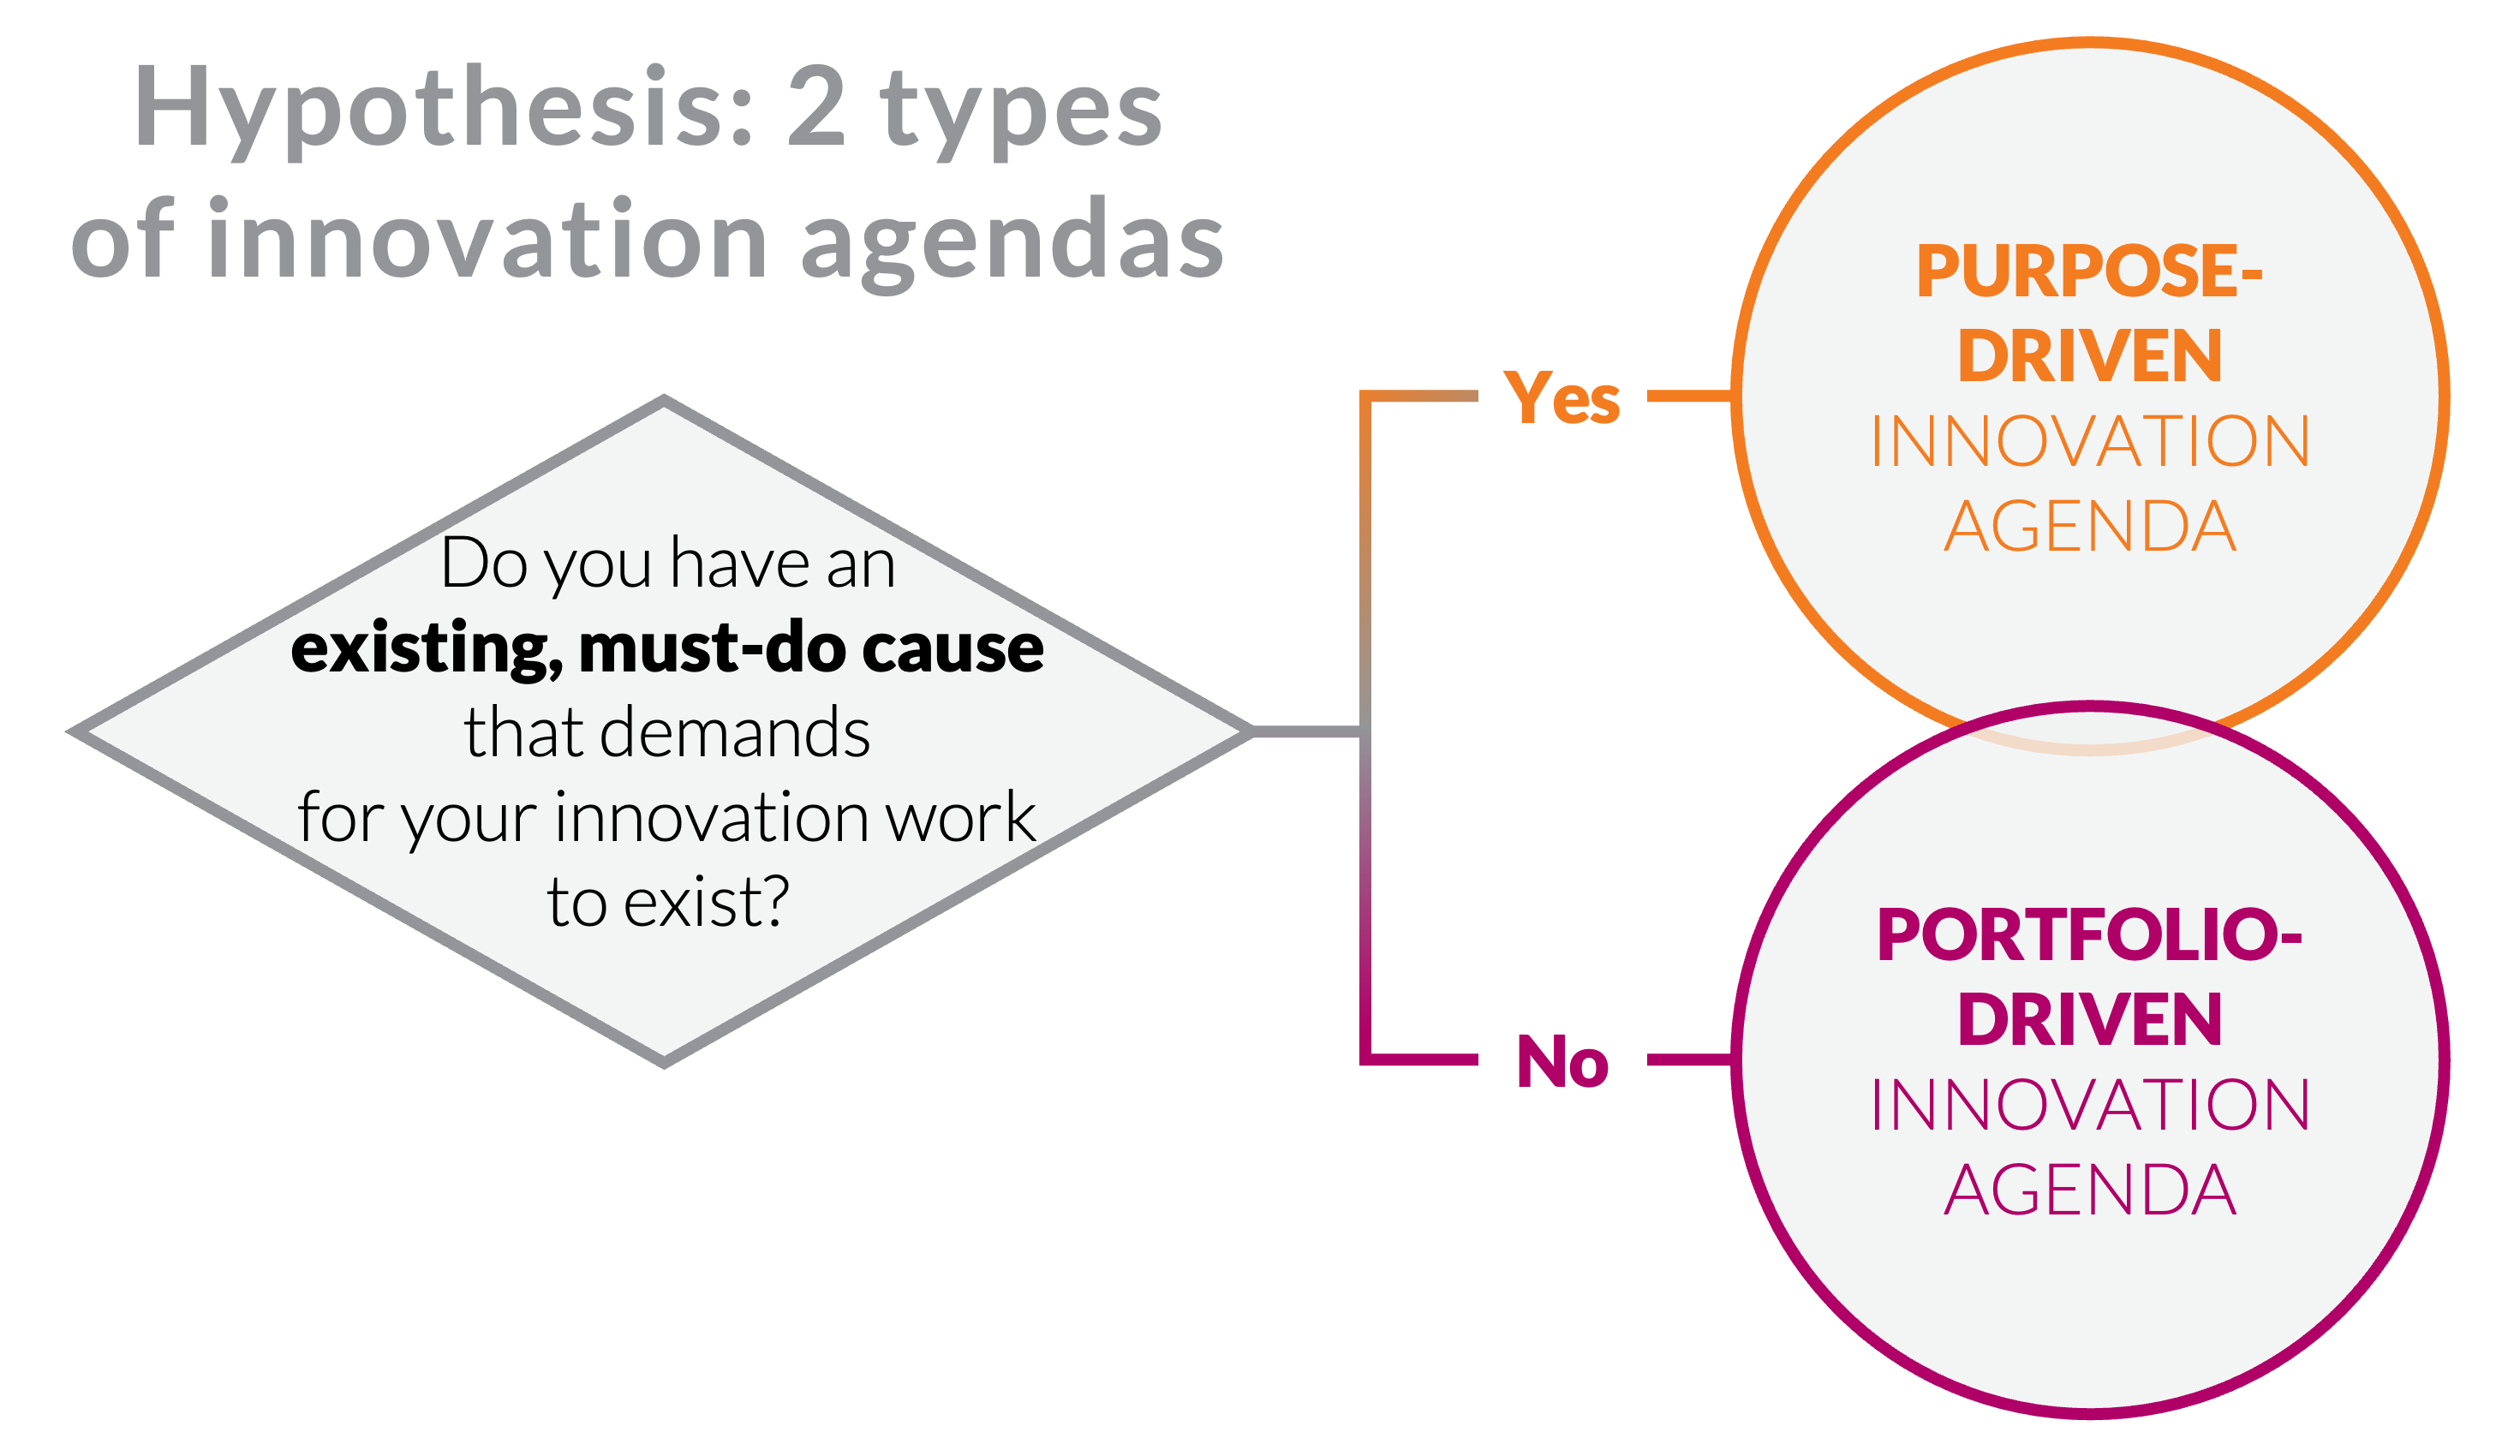 A decision tree suggesting that teams that have an existing, must-do cause can pursue purpose-driven innovation, while others need a portfolio